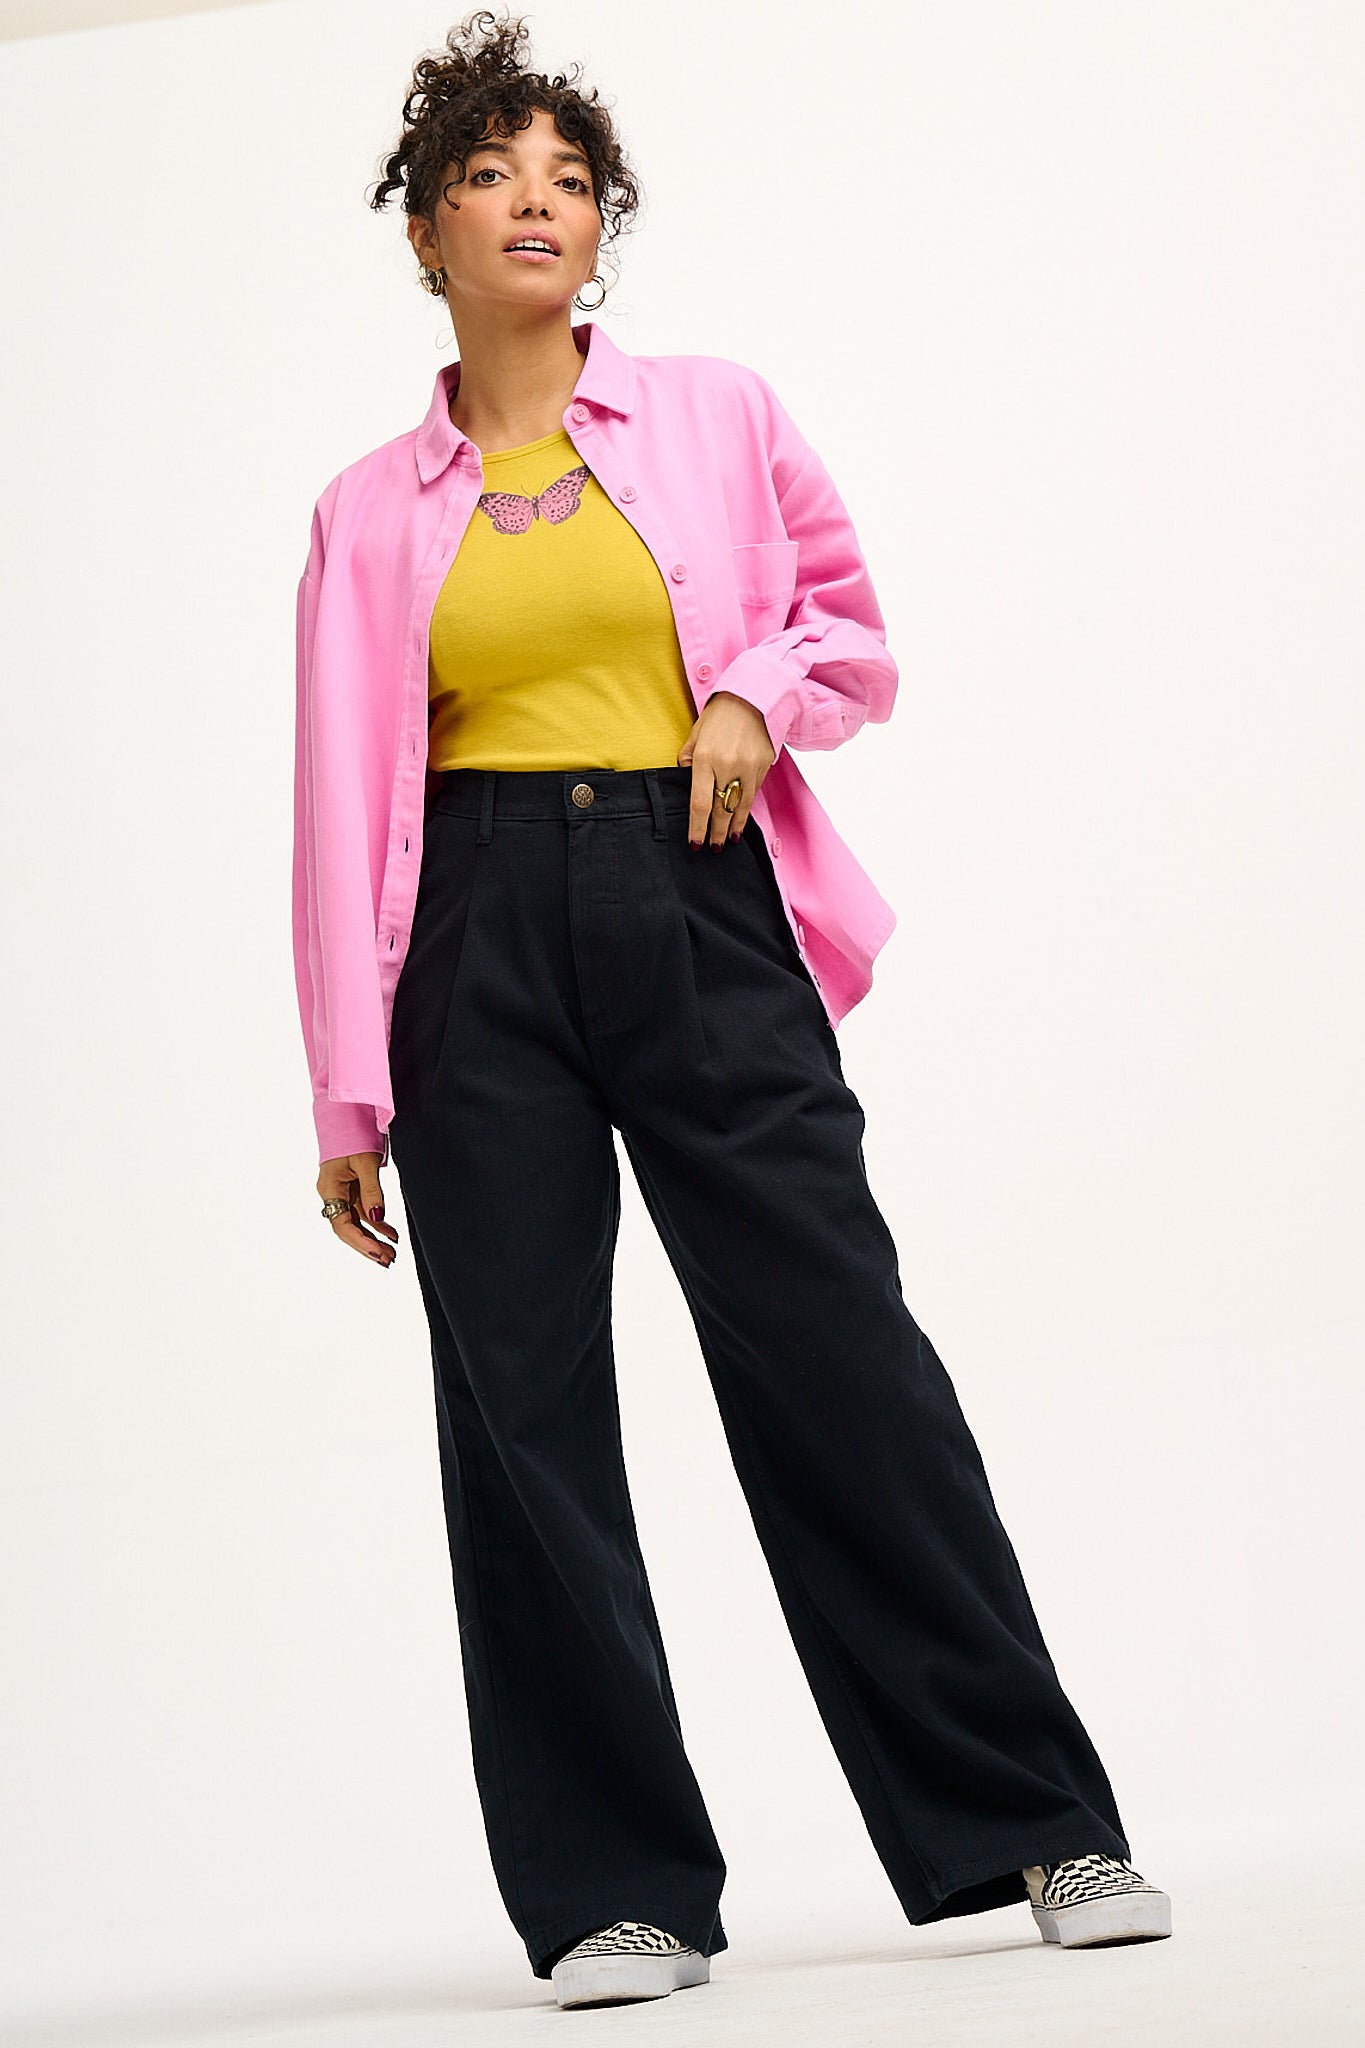 HT Zara INSPIRED Trouser Pants BESTSELLER Suit Pants S to L fit